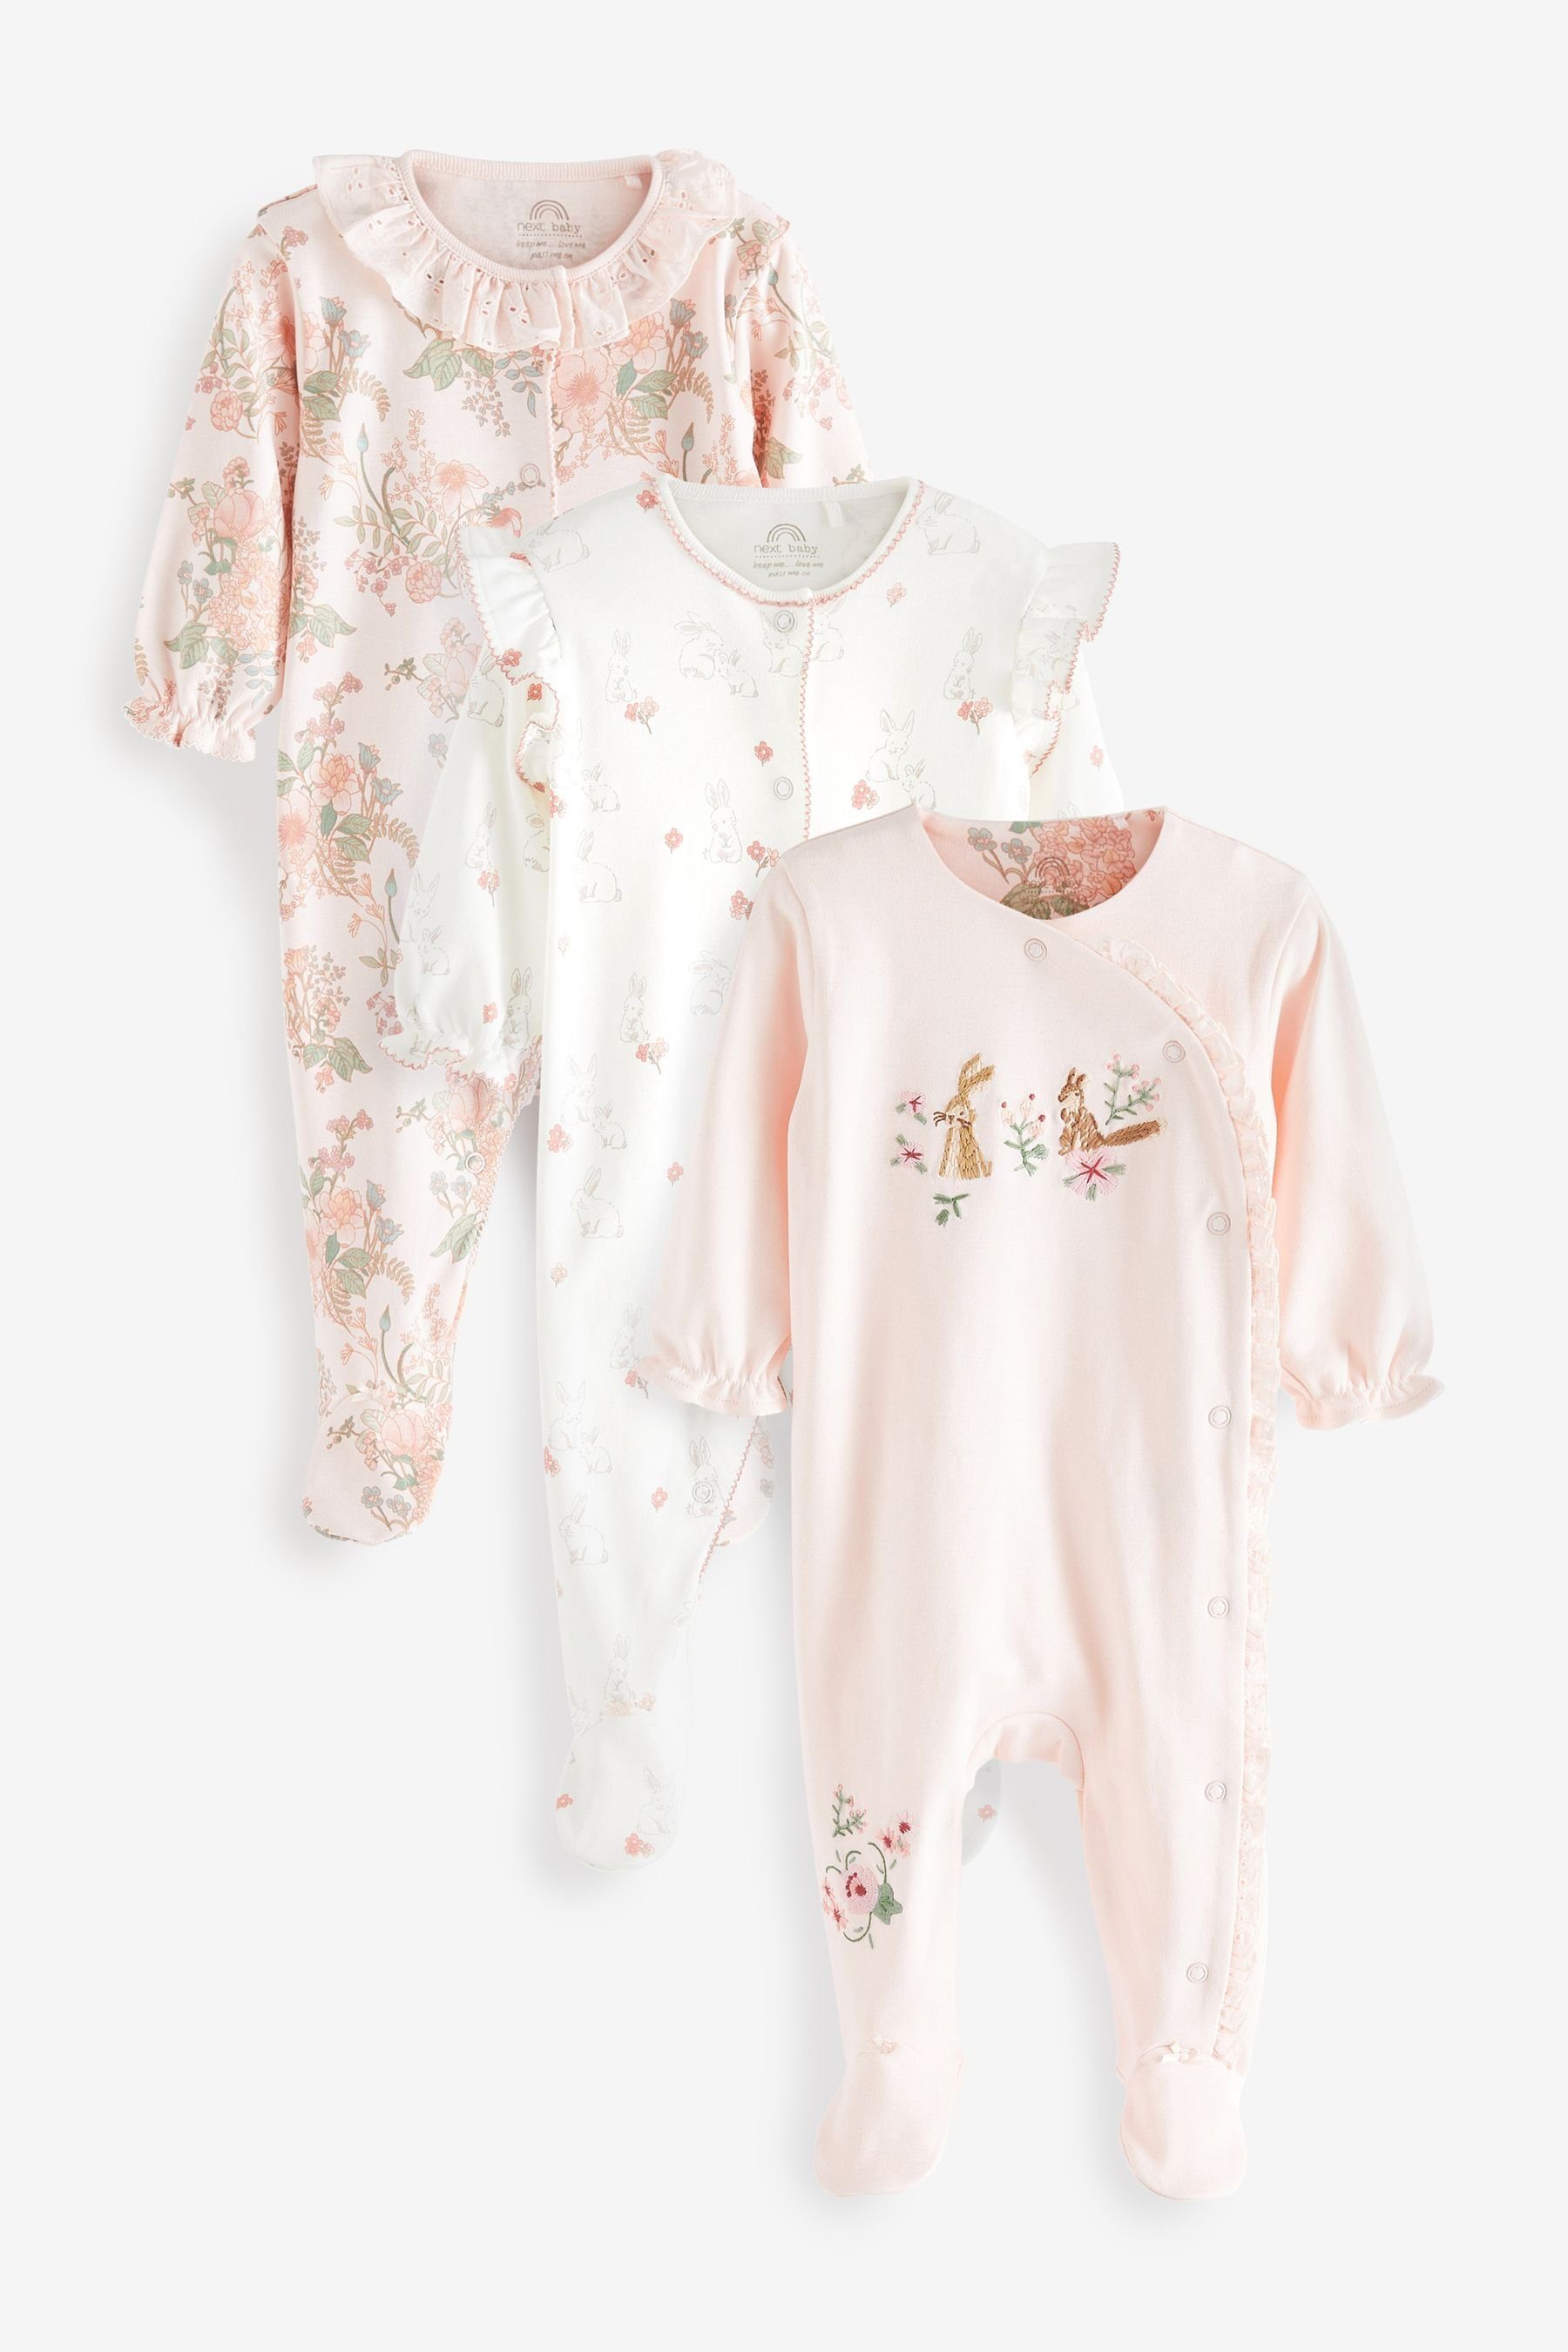 Next Schlafoverall Pyjamas, 3er-Pack Pale Bunny/Floral (3-tlg) Pink